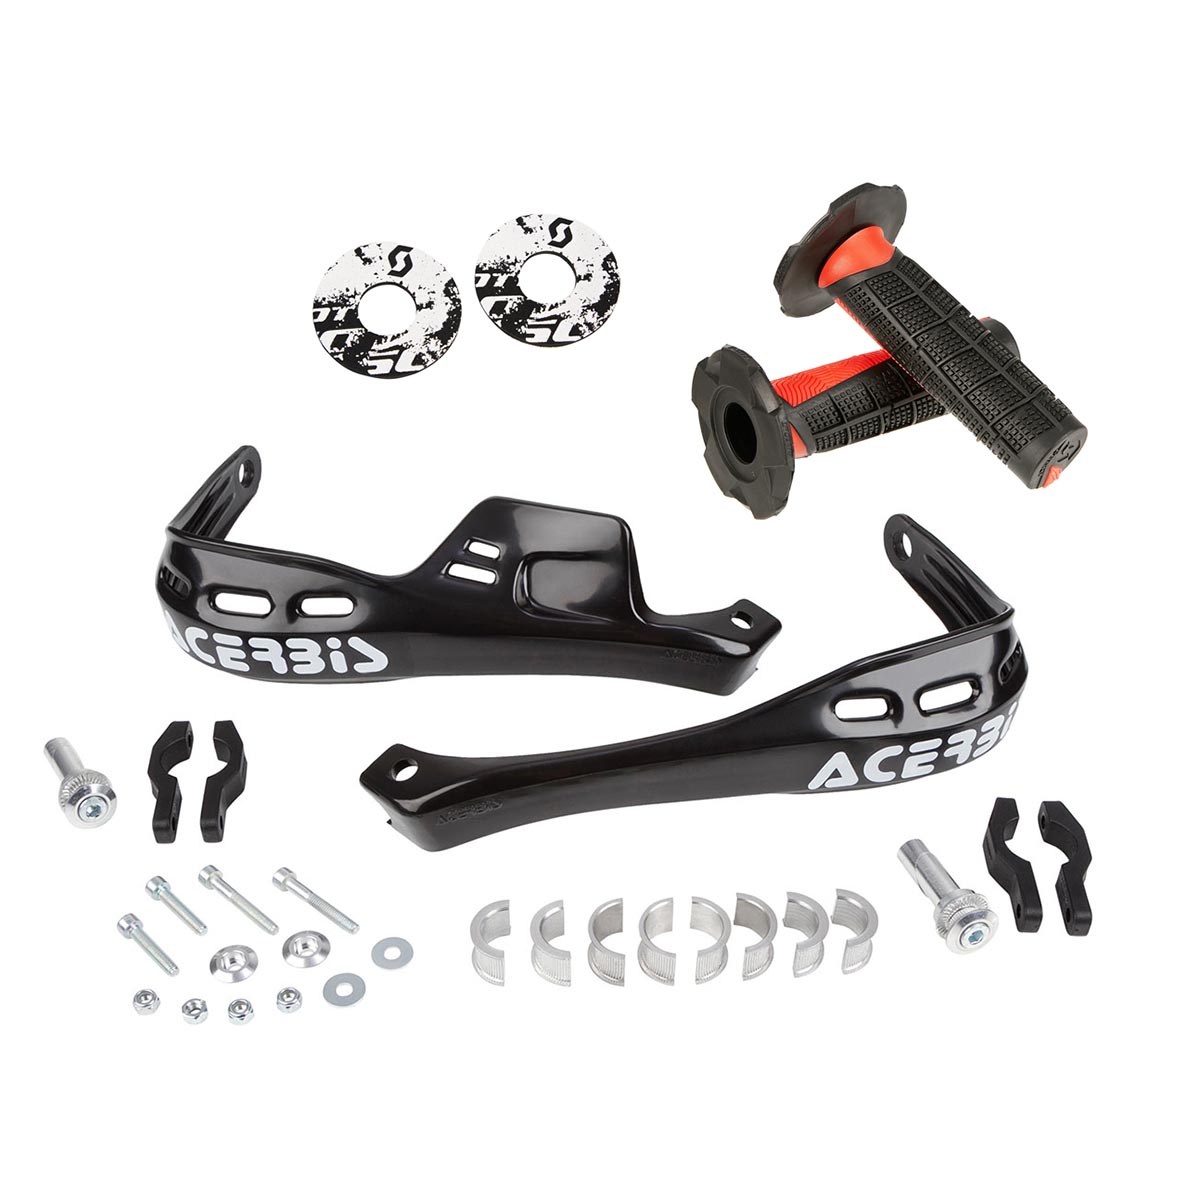 Acerbis Handguards Rally Brush Incl. Scott Grip and donuts